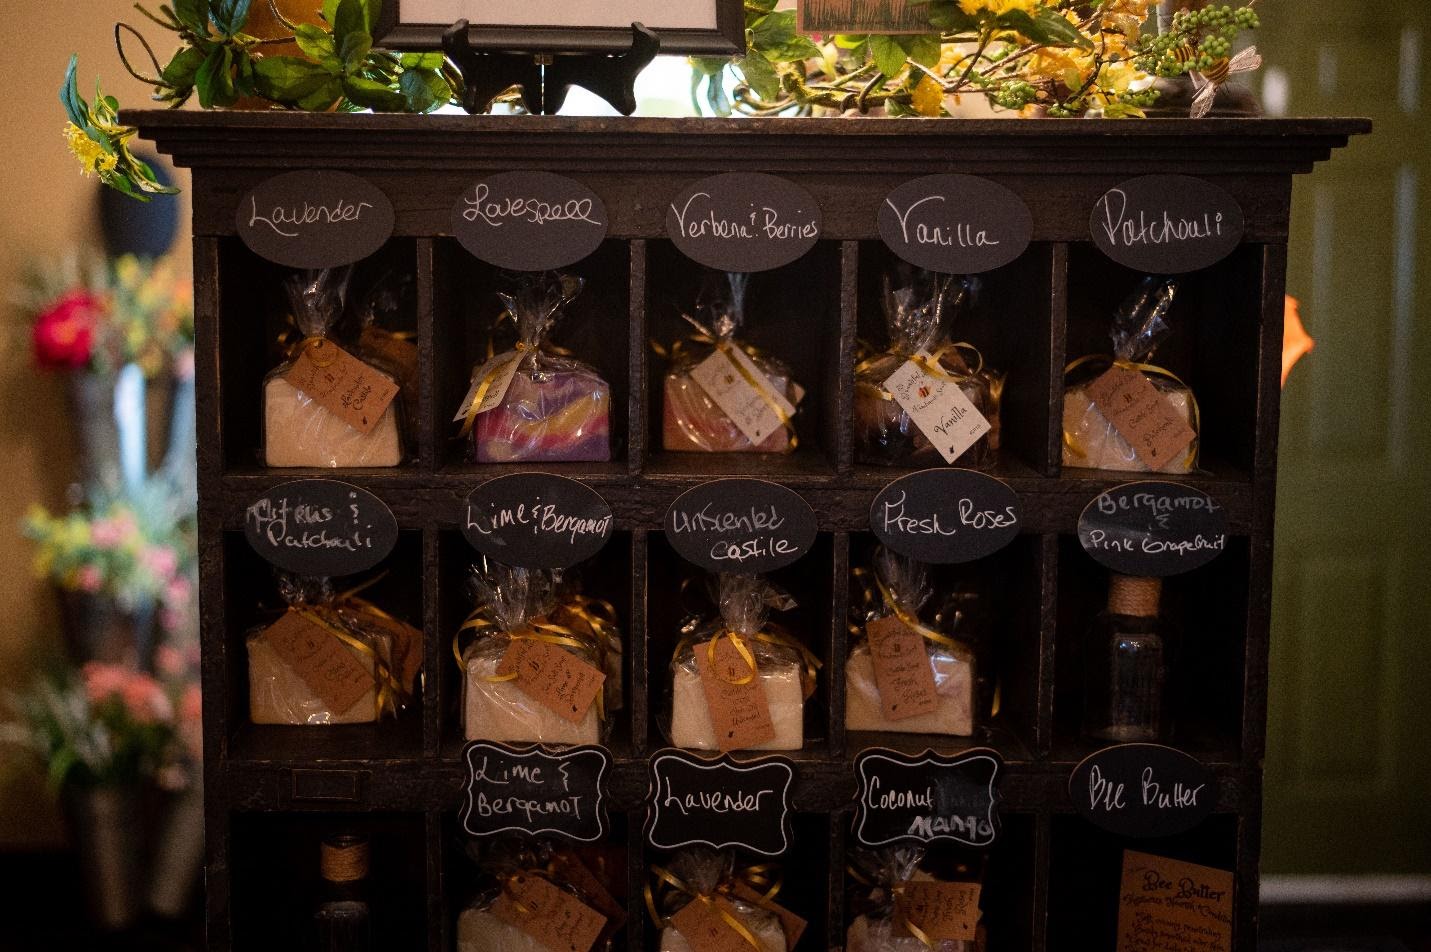 Creating specialty fragrances makes good business scents for Penn & Co.